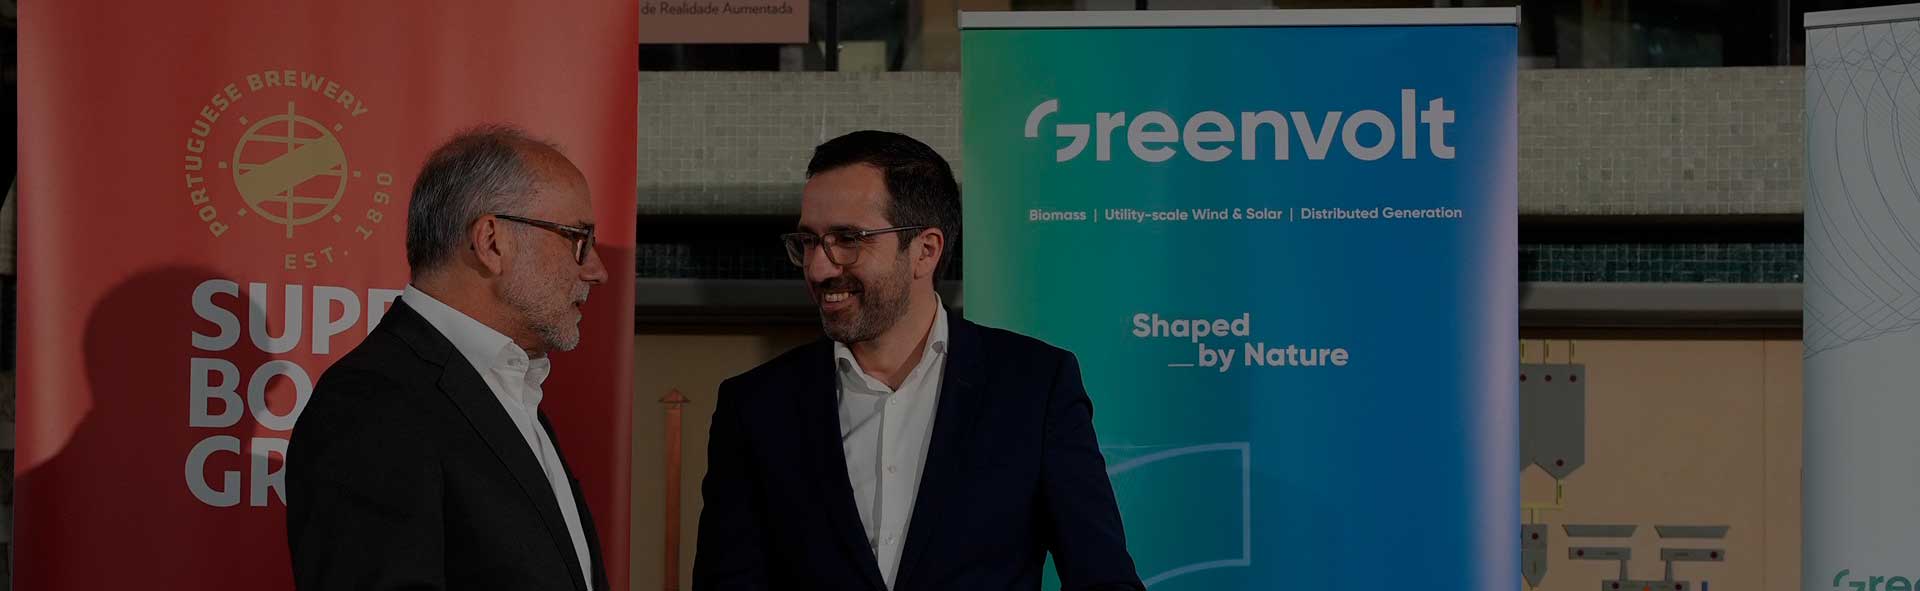 Greenvolt reinforces its leadership in Energy Communities with a Super Bock Group project of 11 MWp